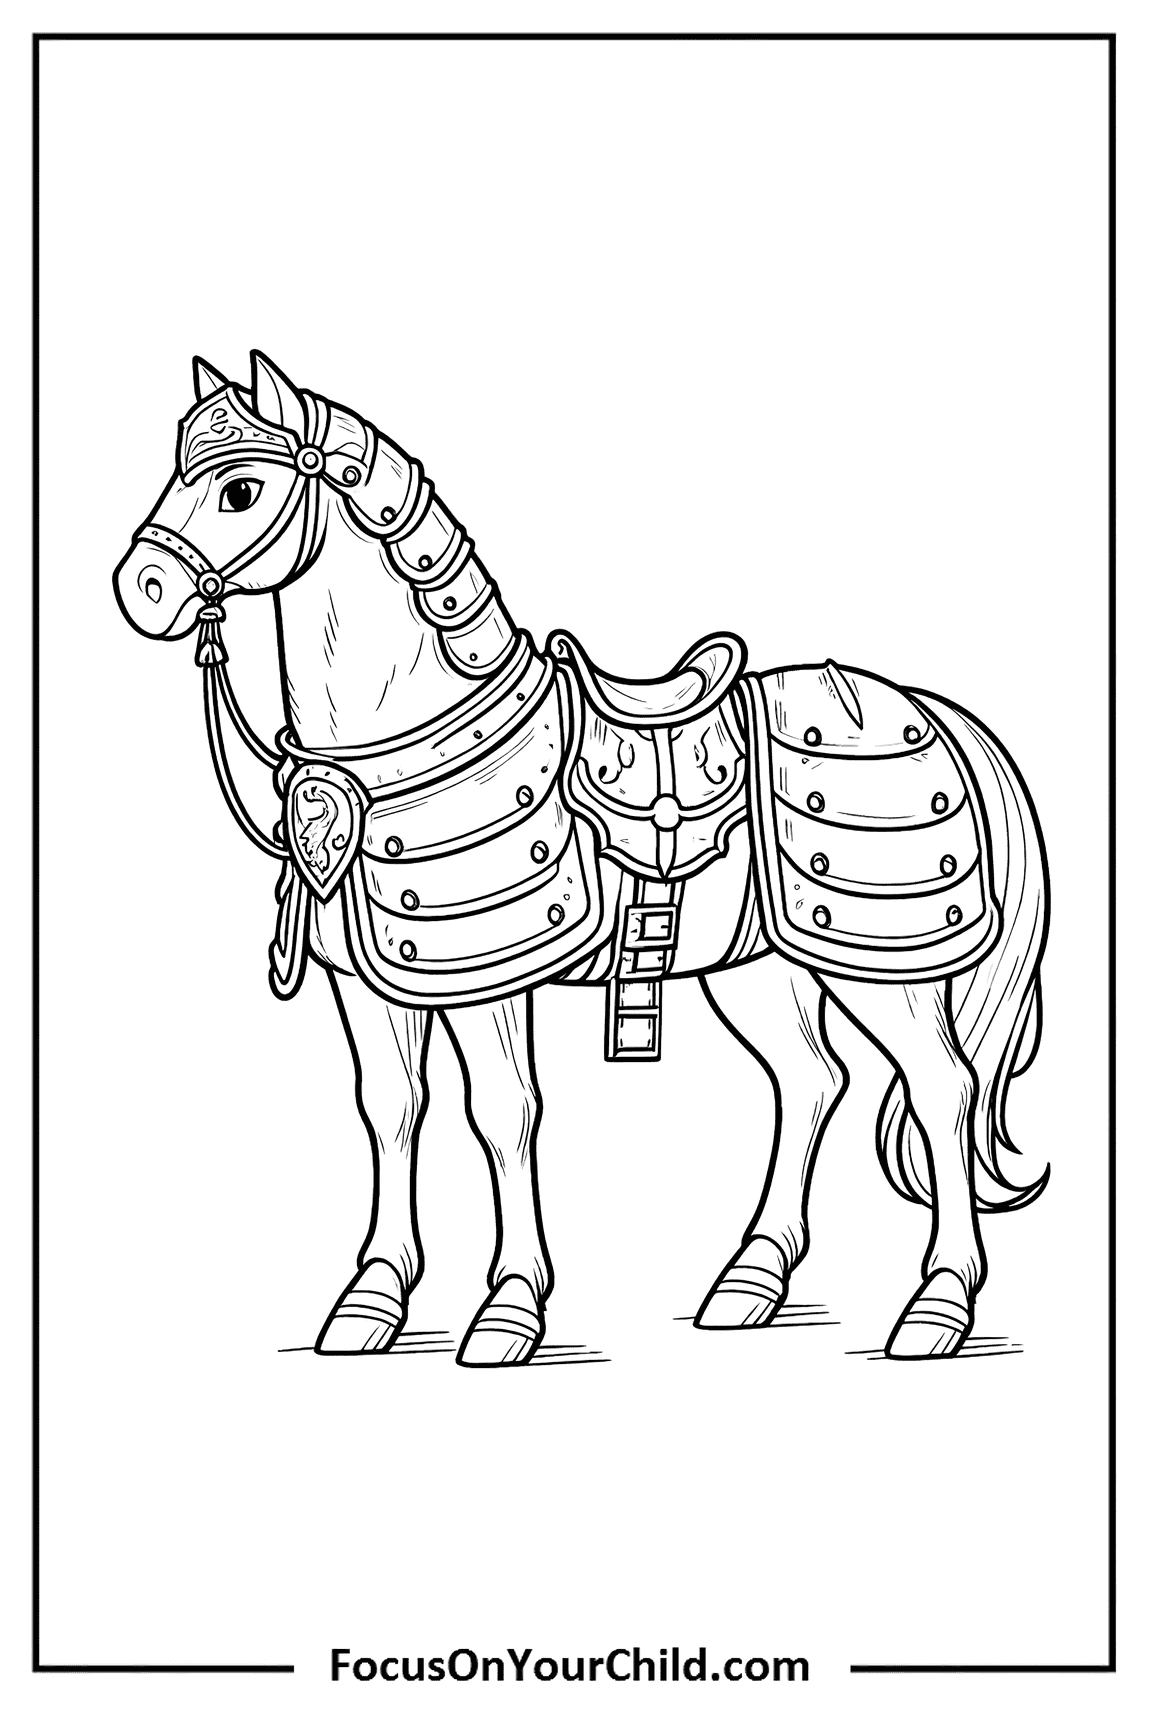 Majestic armored horse in detailed armor, exuding nobility and strength.